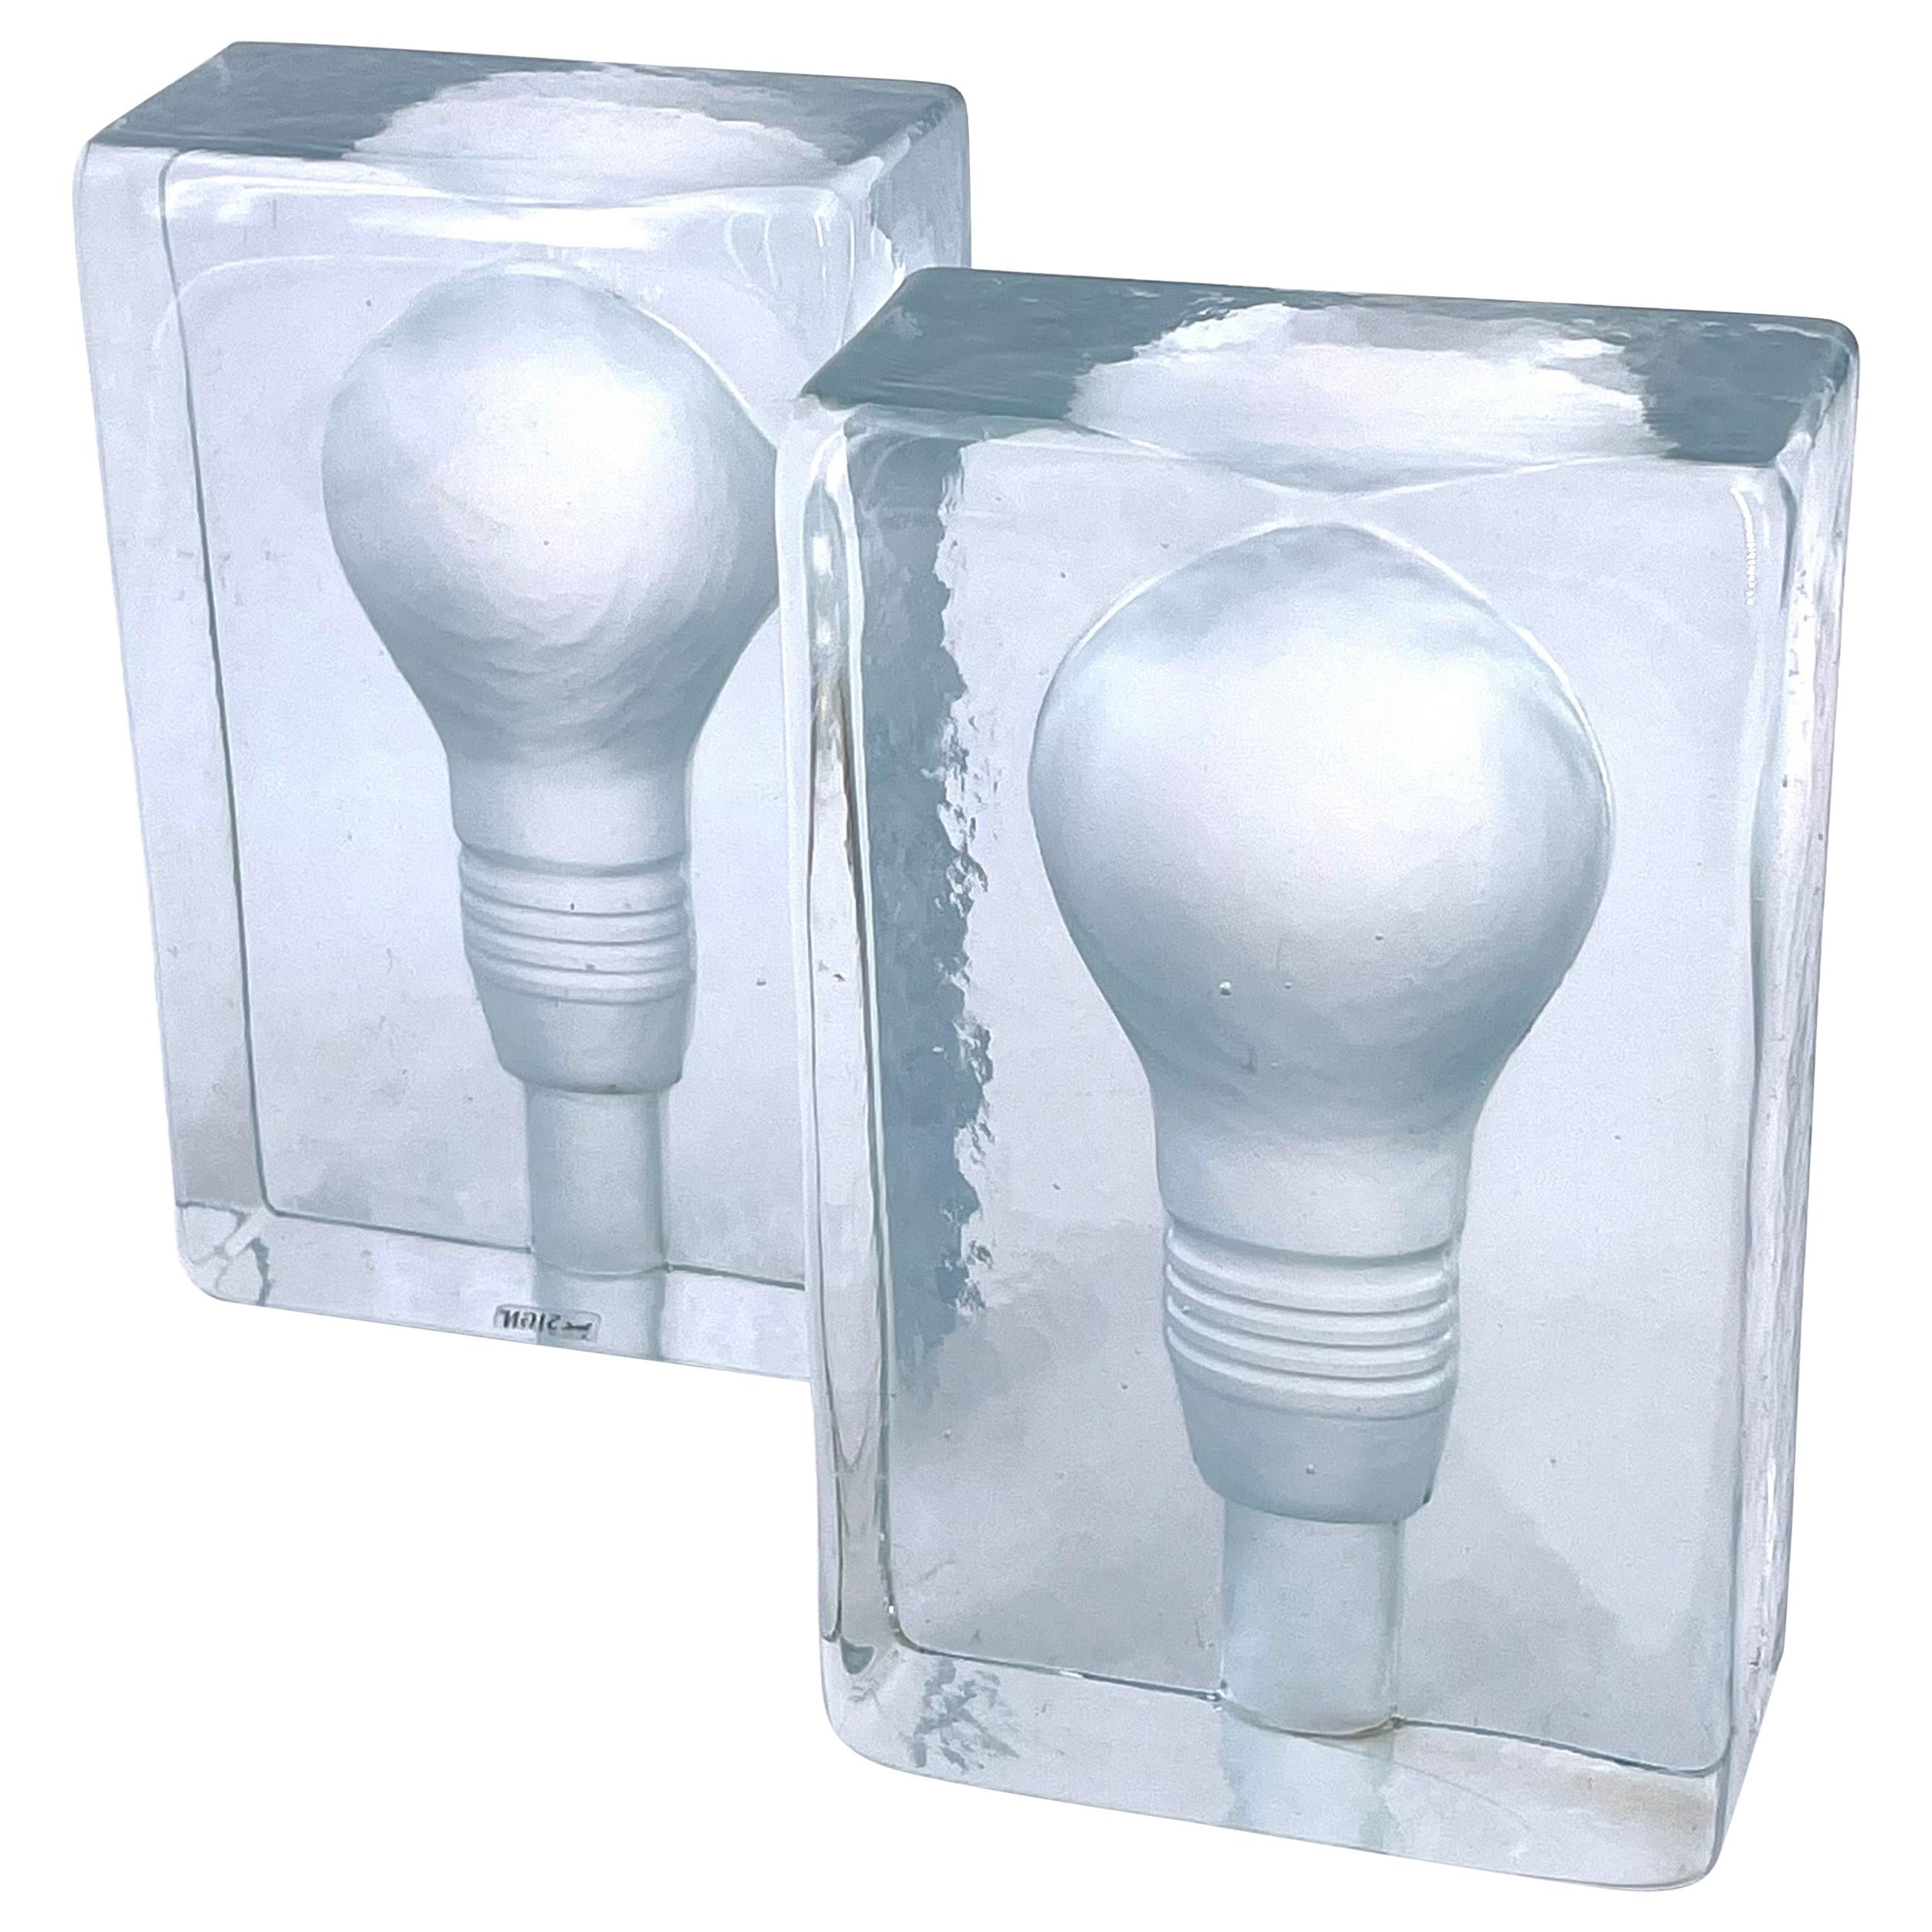 Pair of Solid Glass Bookends with Lightbulb Design